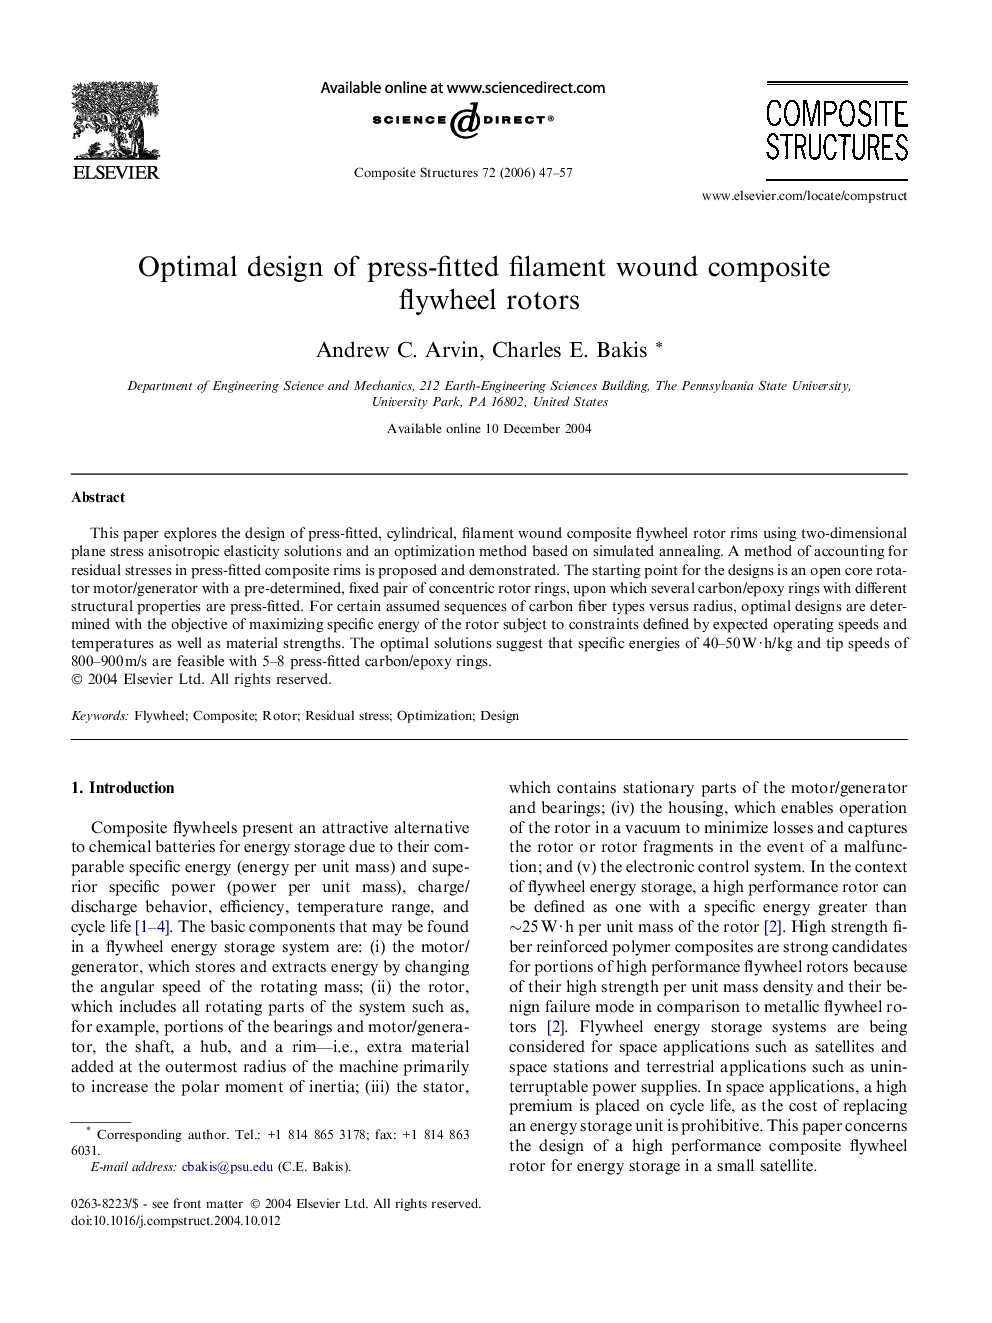 Optimal design of press-fitted filament wound composite flywheel rotors